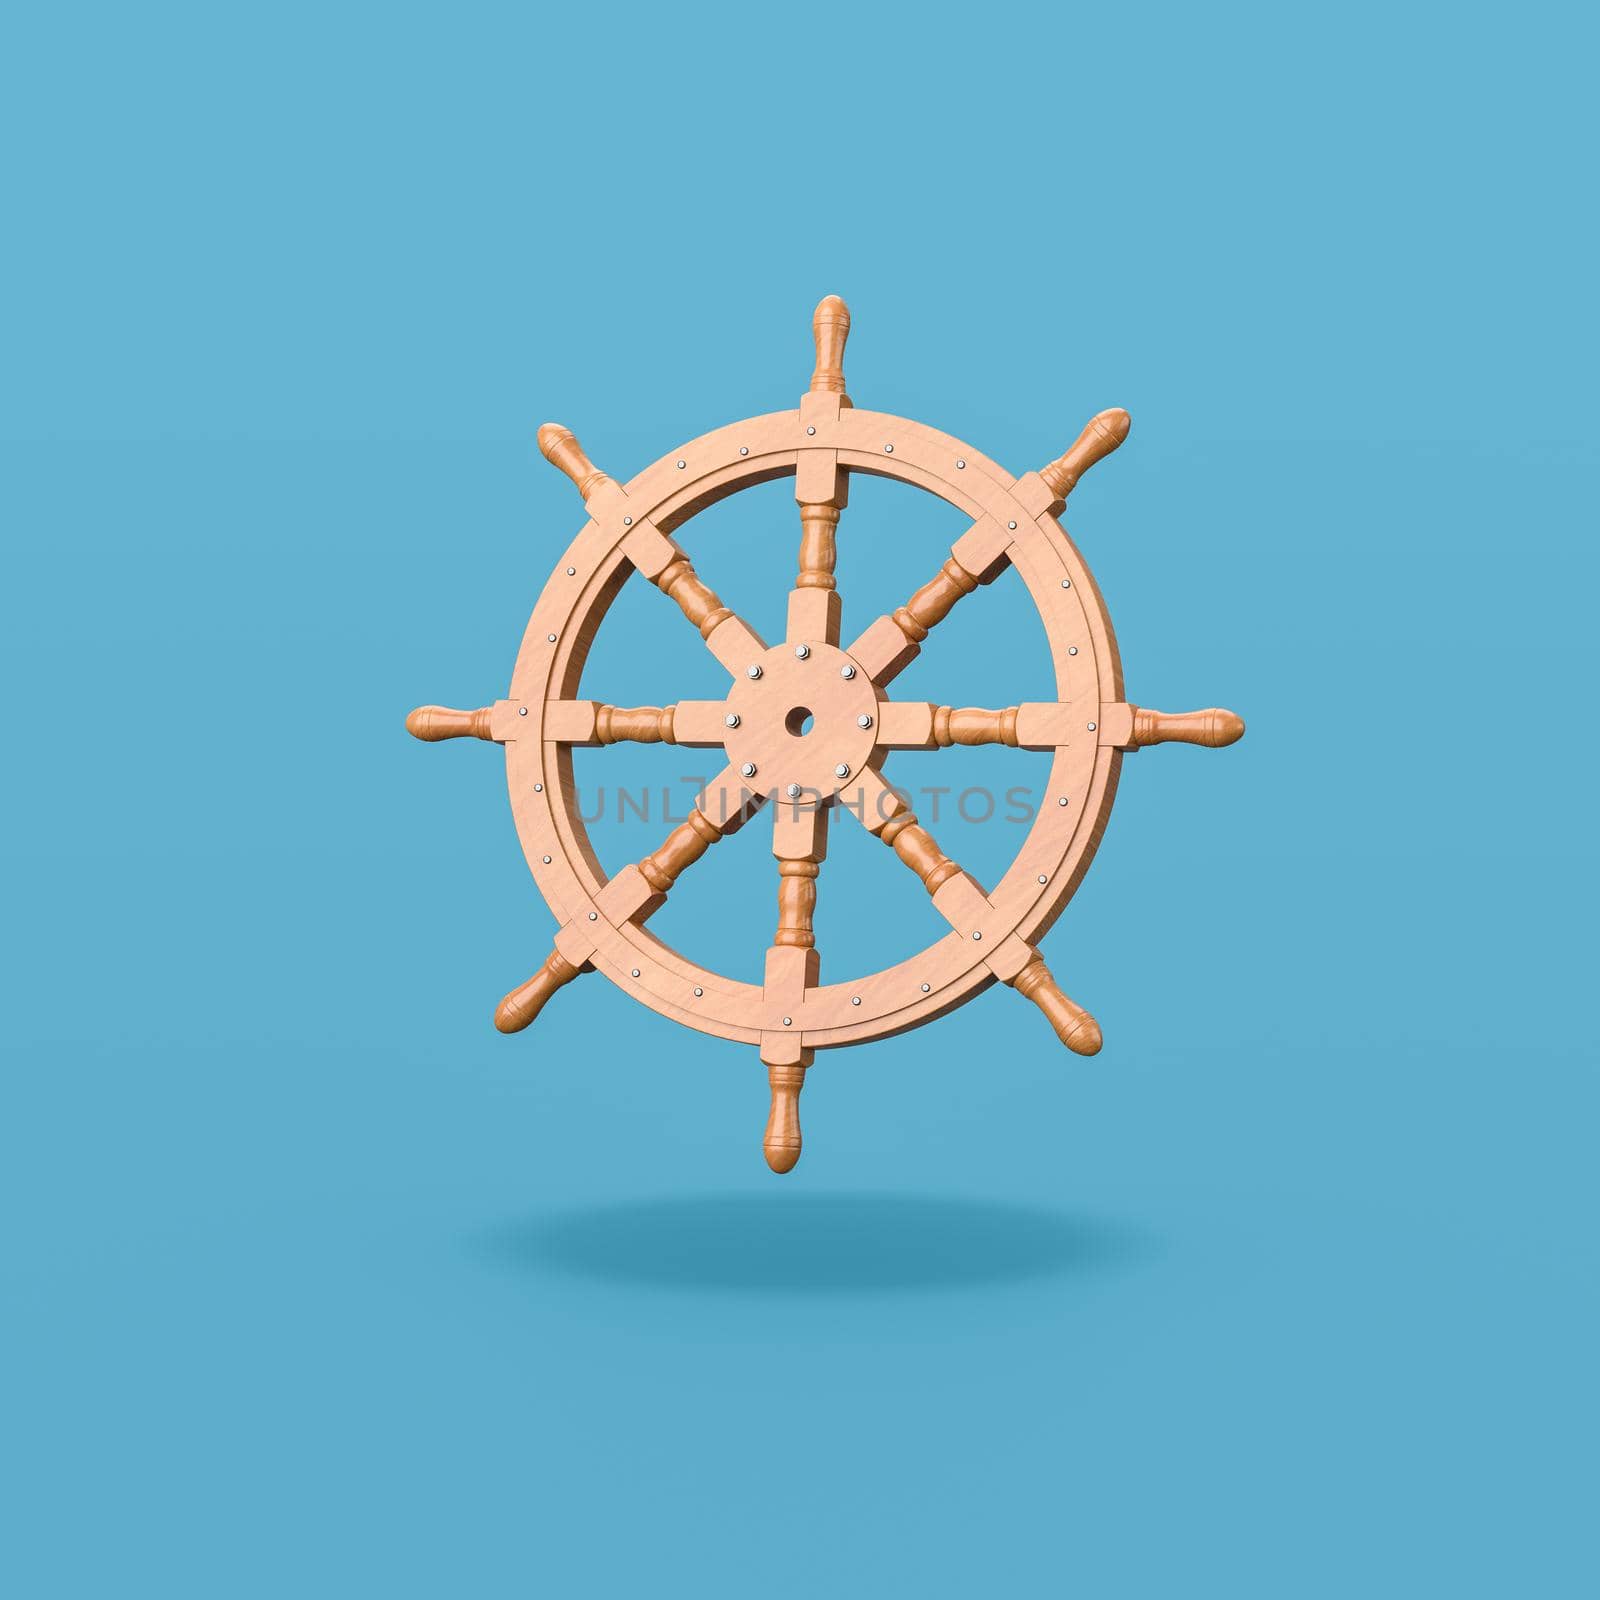 Wooden Rudder Wheel Isolated on Flat Blue Background with Shadow 3D Illustration